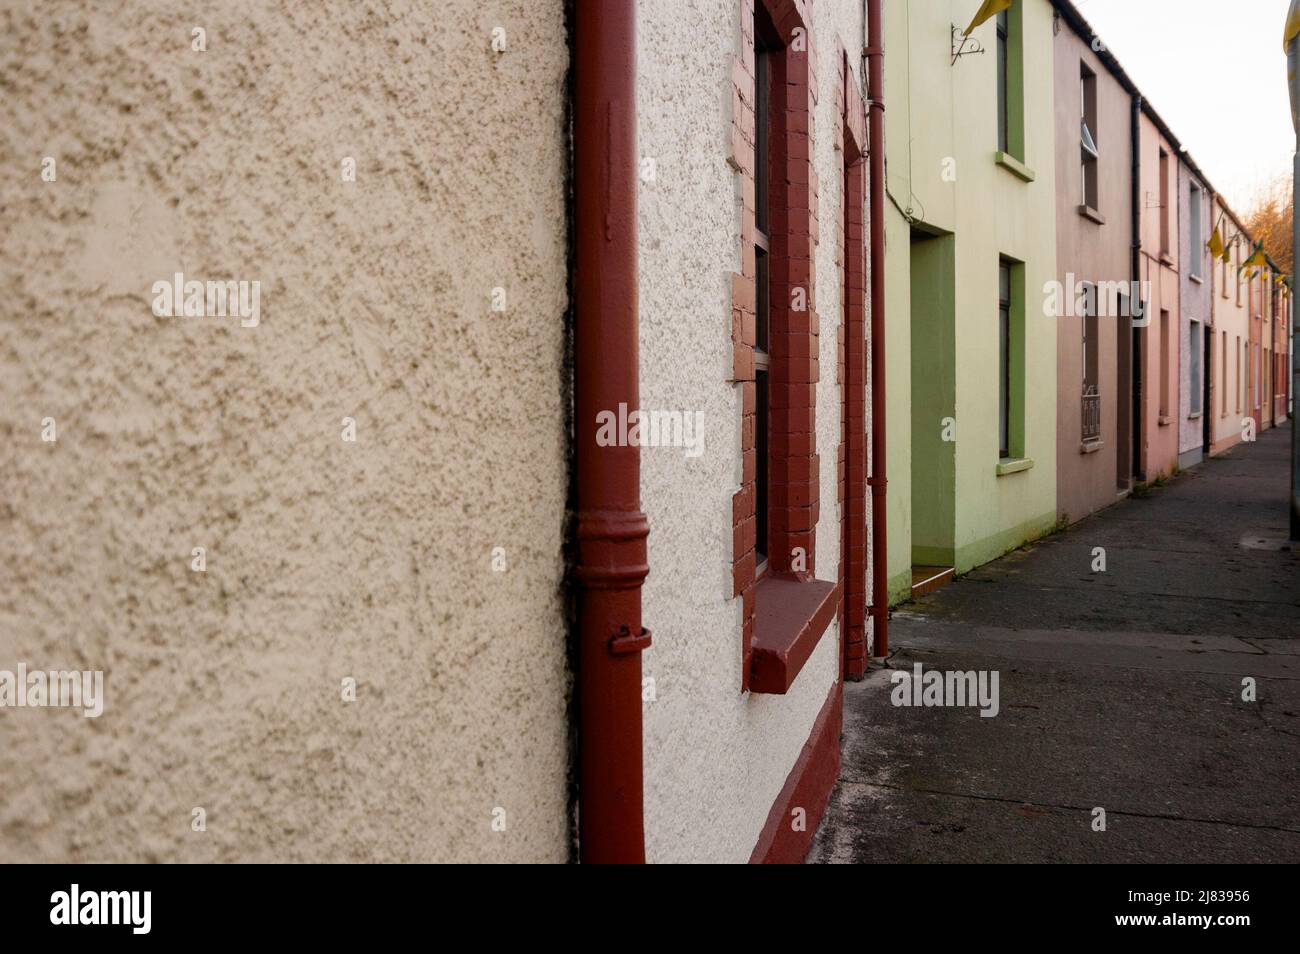 Colorful townhomes in Tralee, Ireland Stock Photo